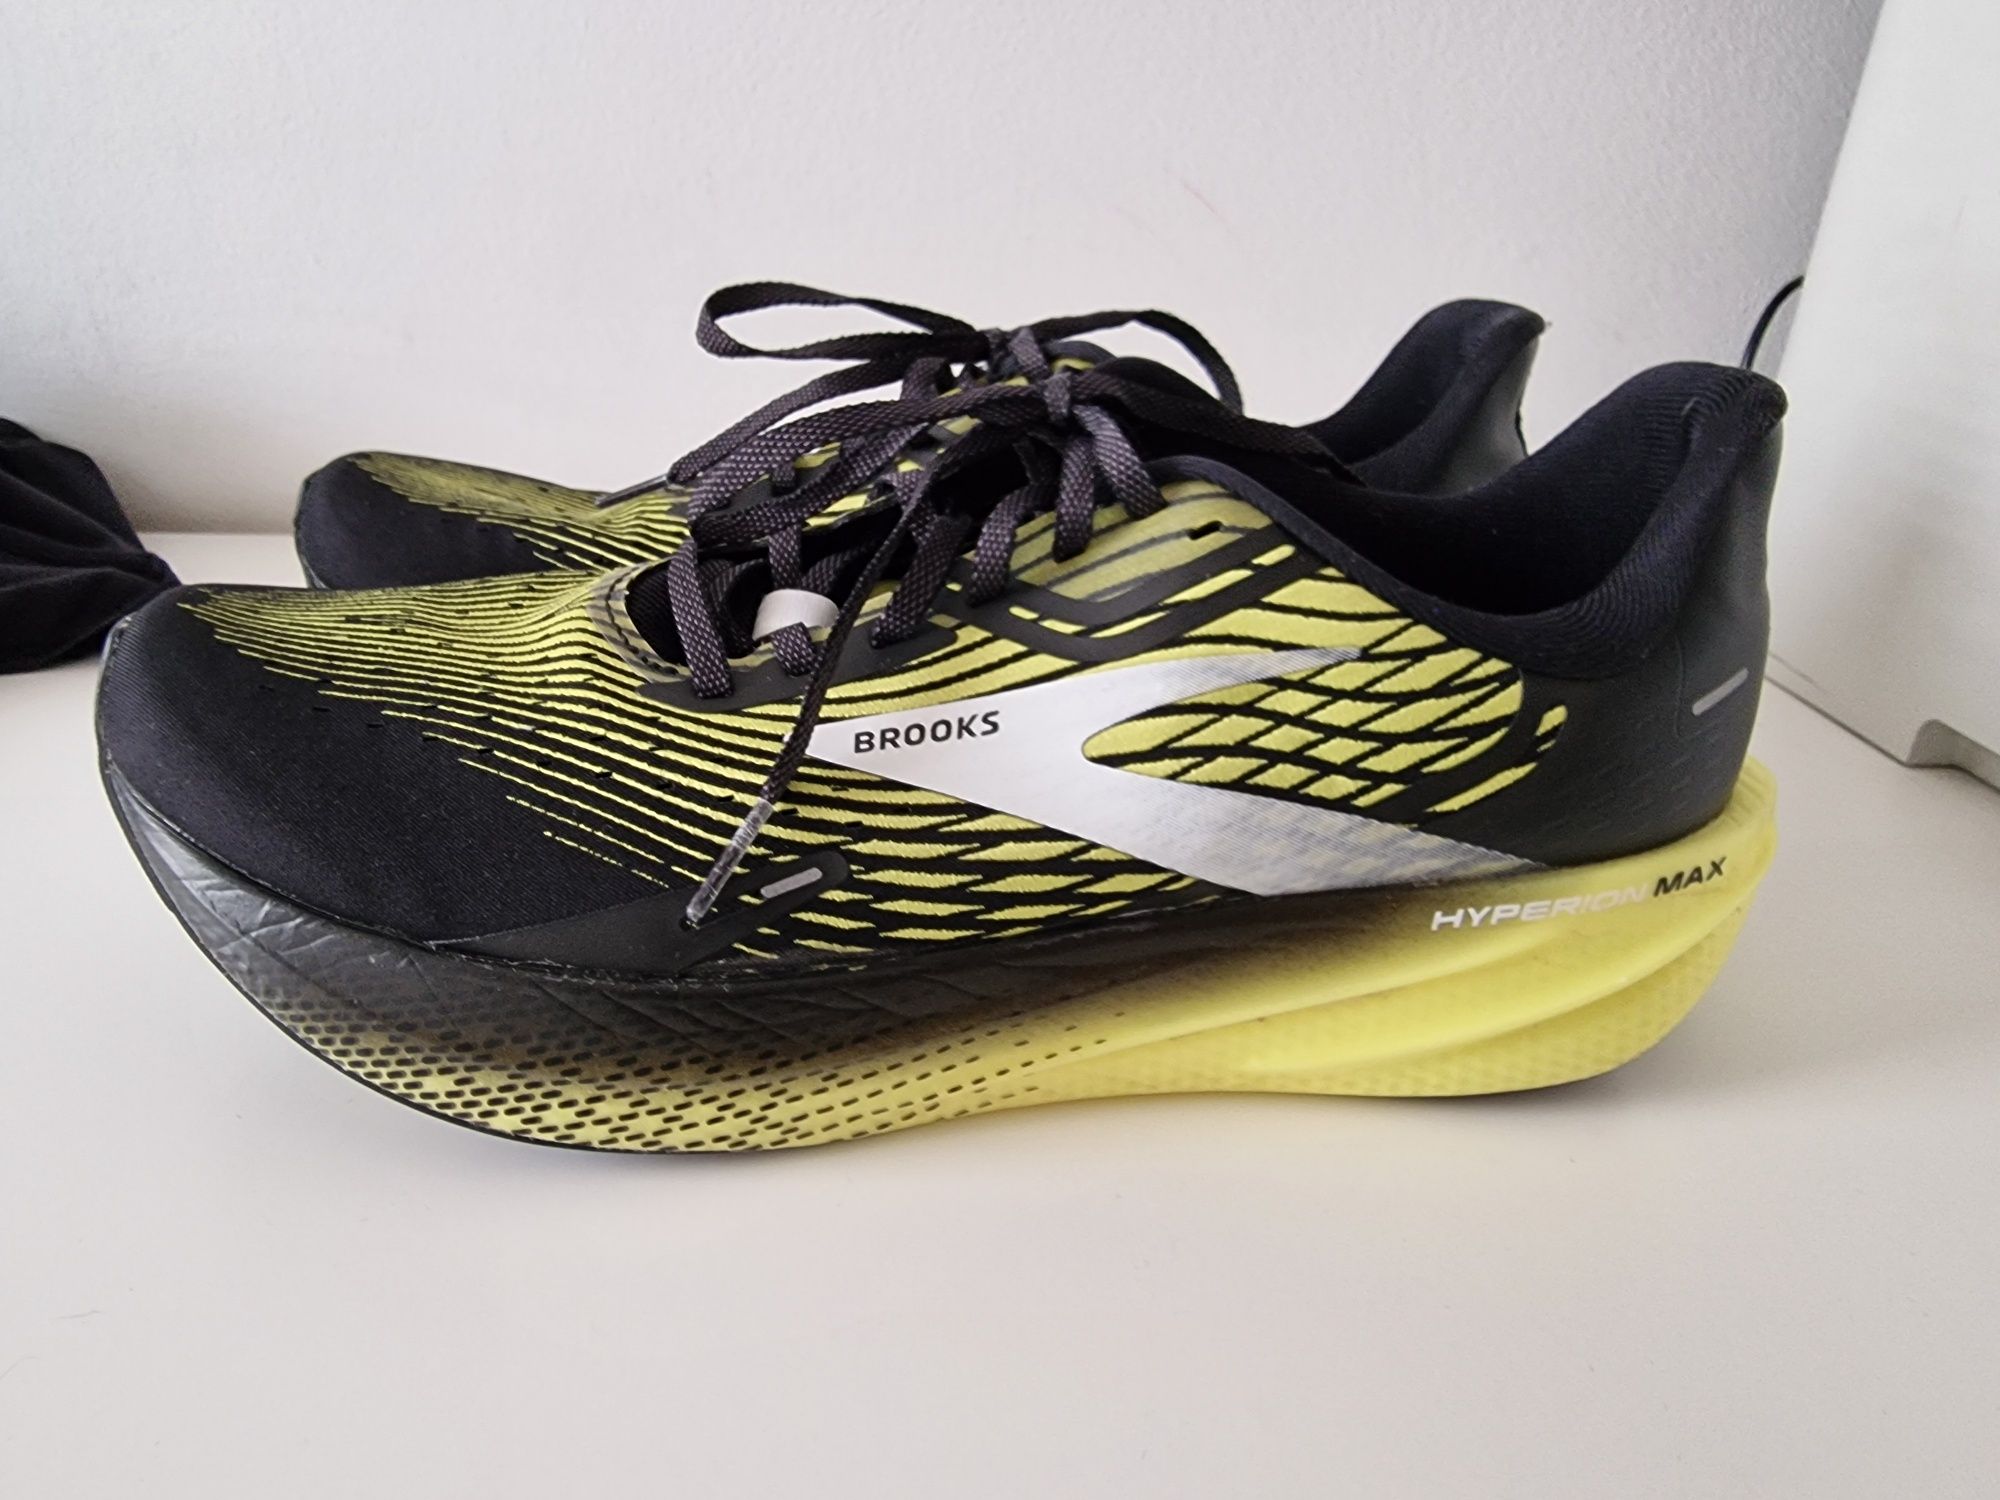 Buty Brooks Hyperion Max